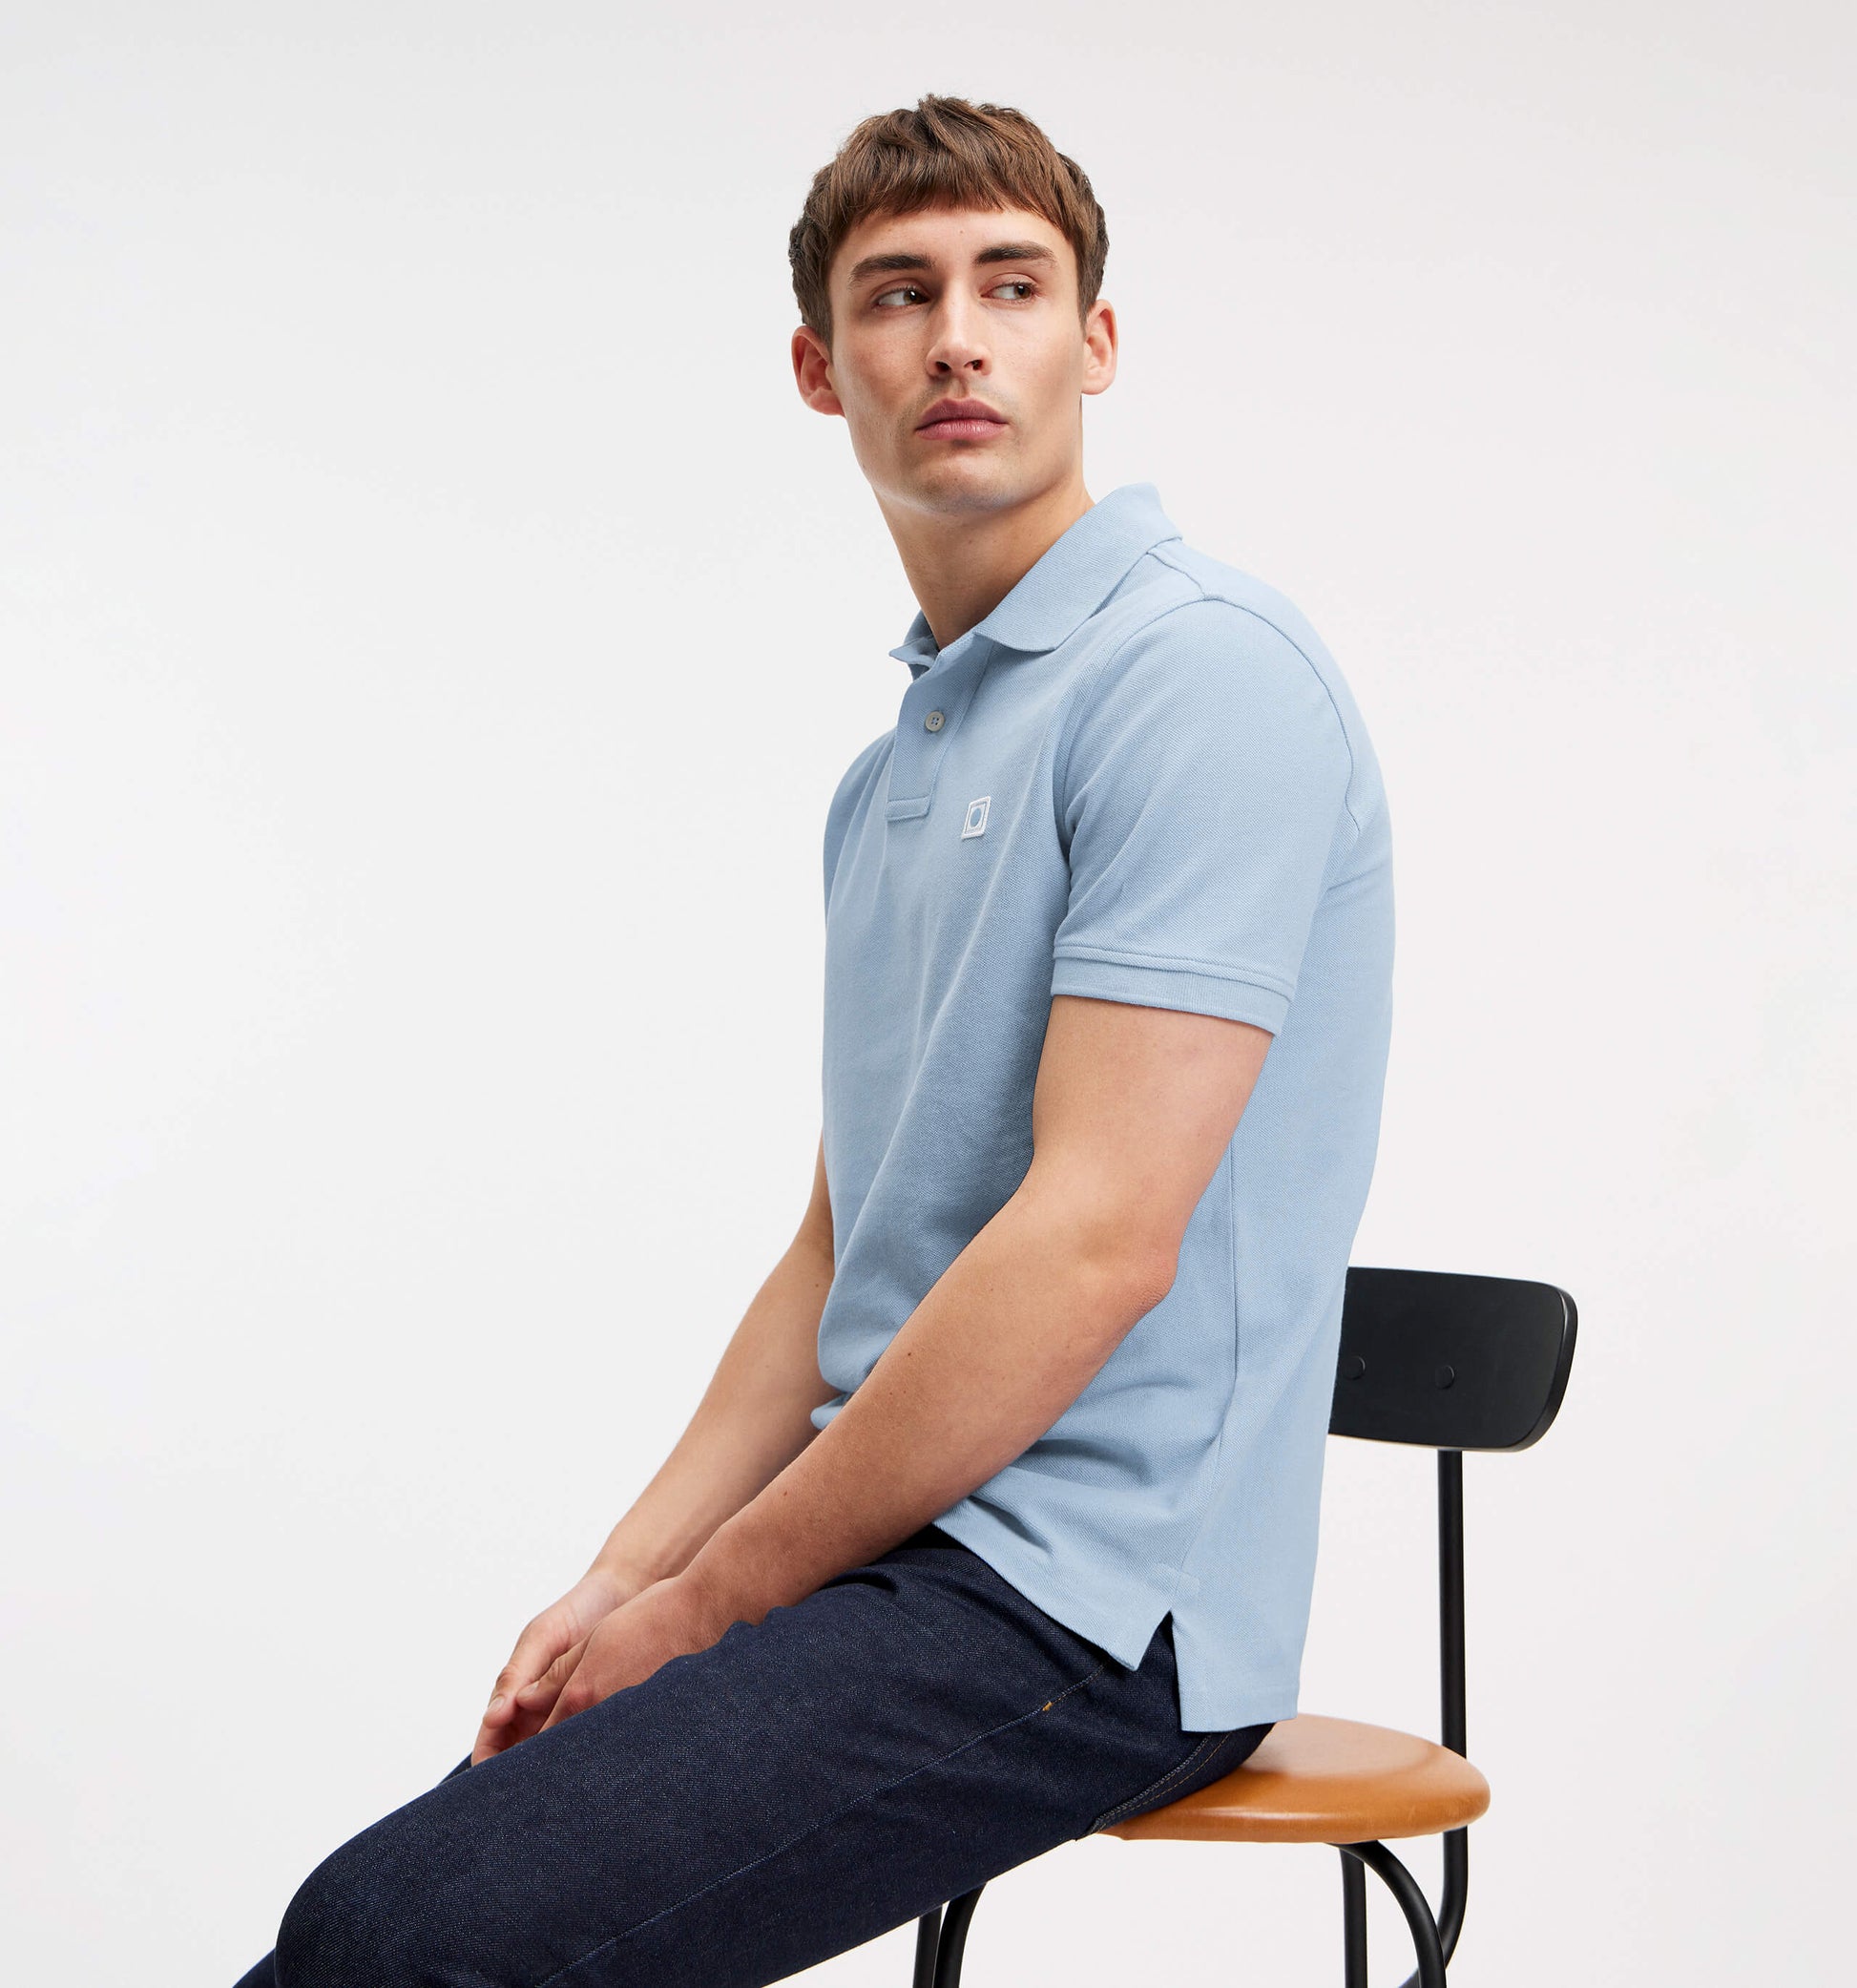 The Rene - Pique Polo In Light Blue From King Essentials